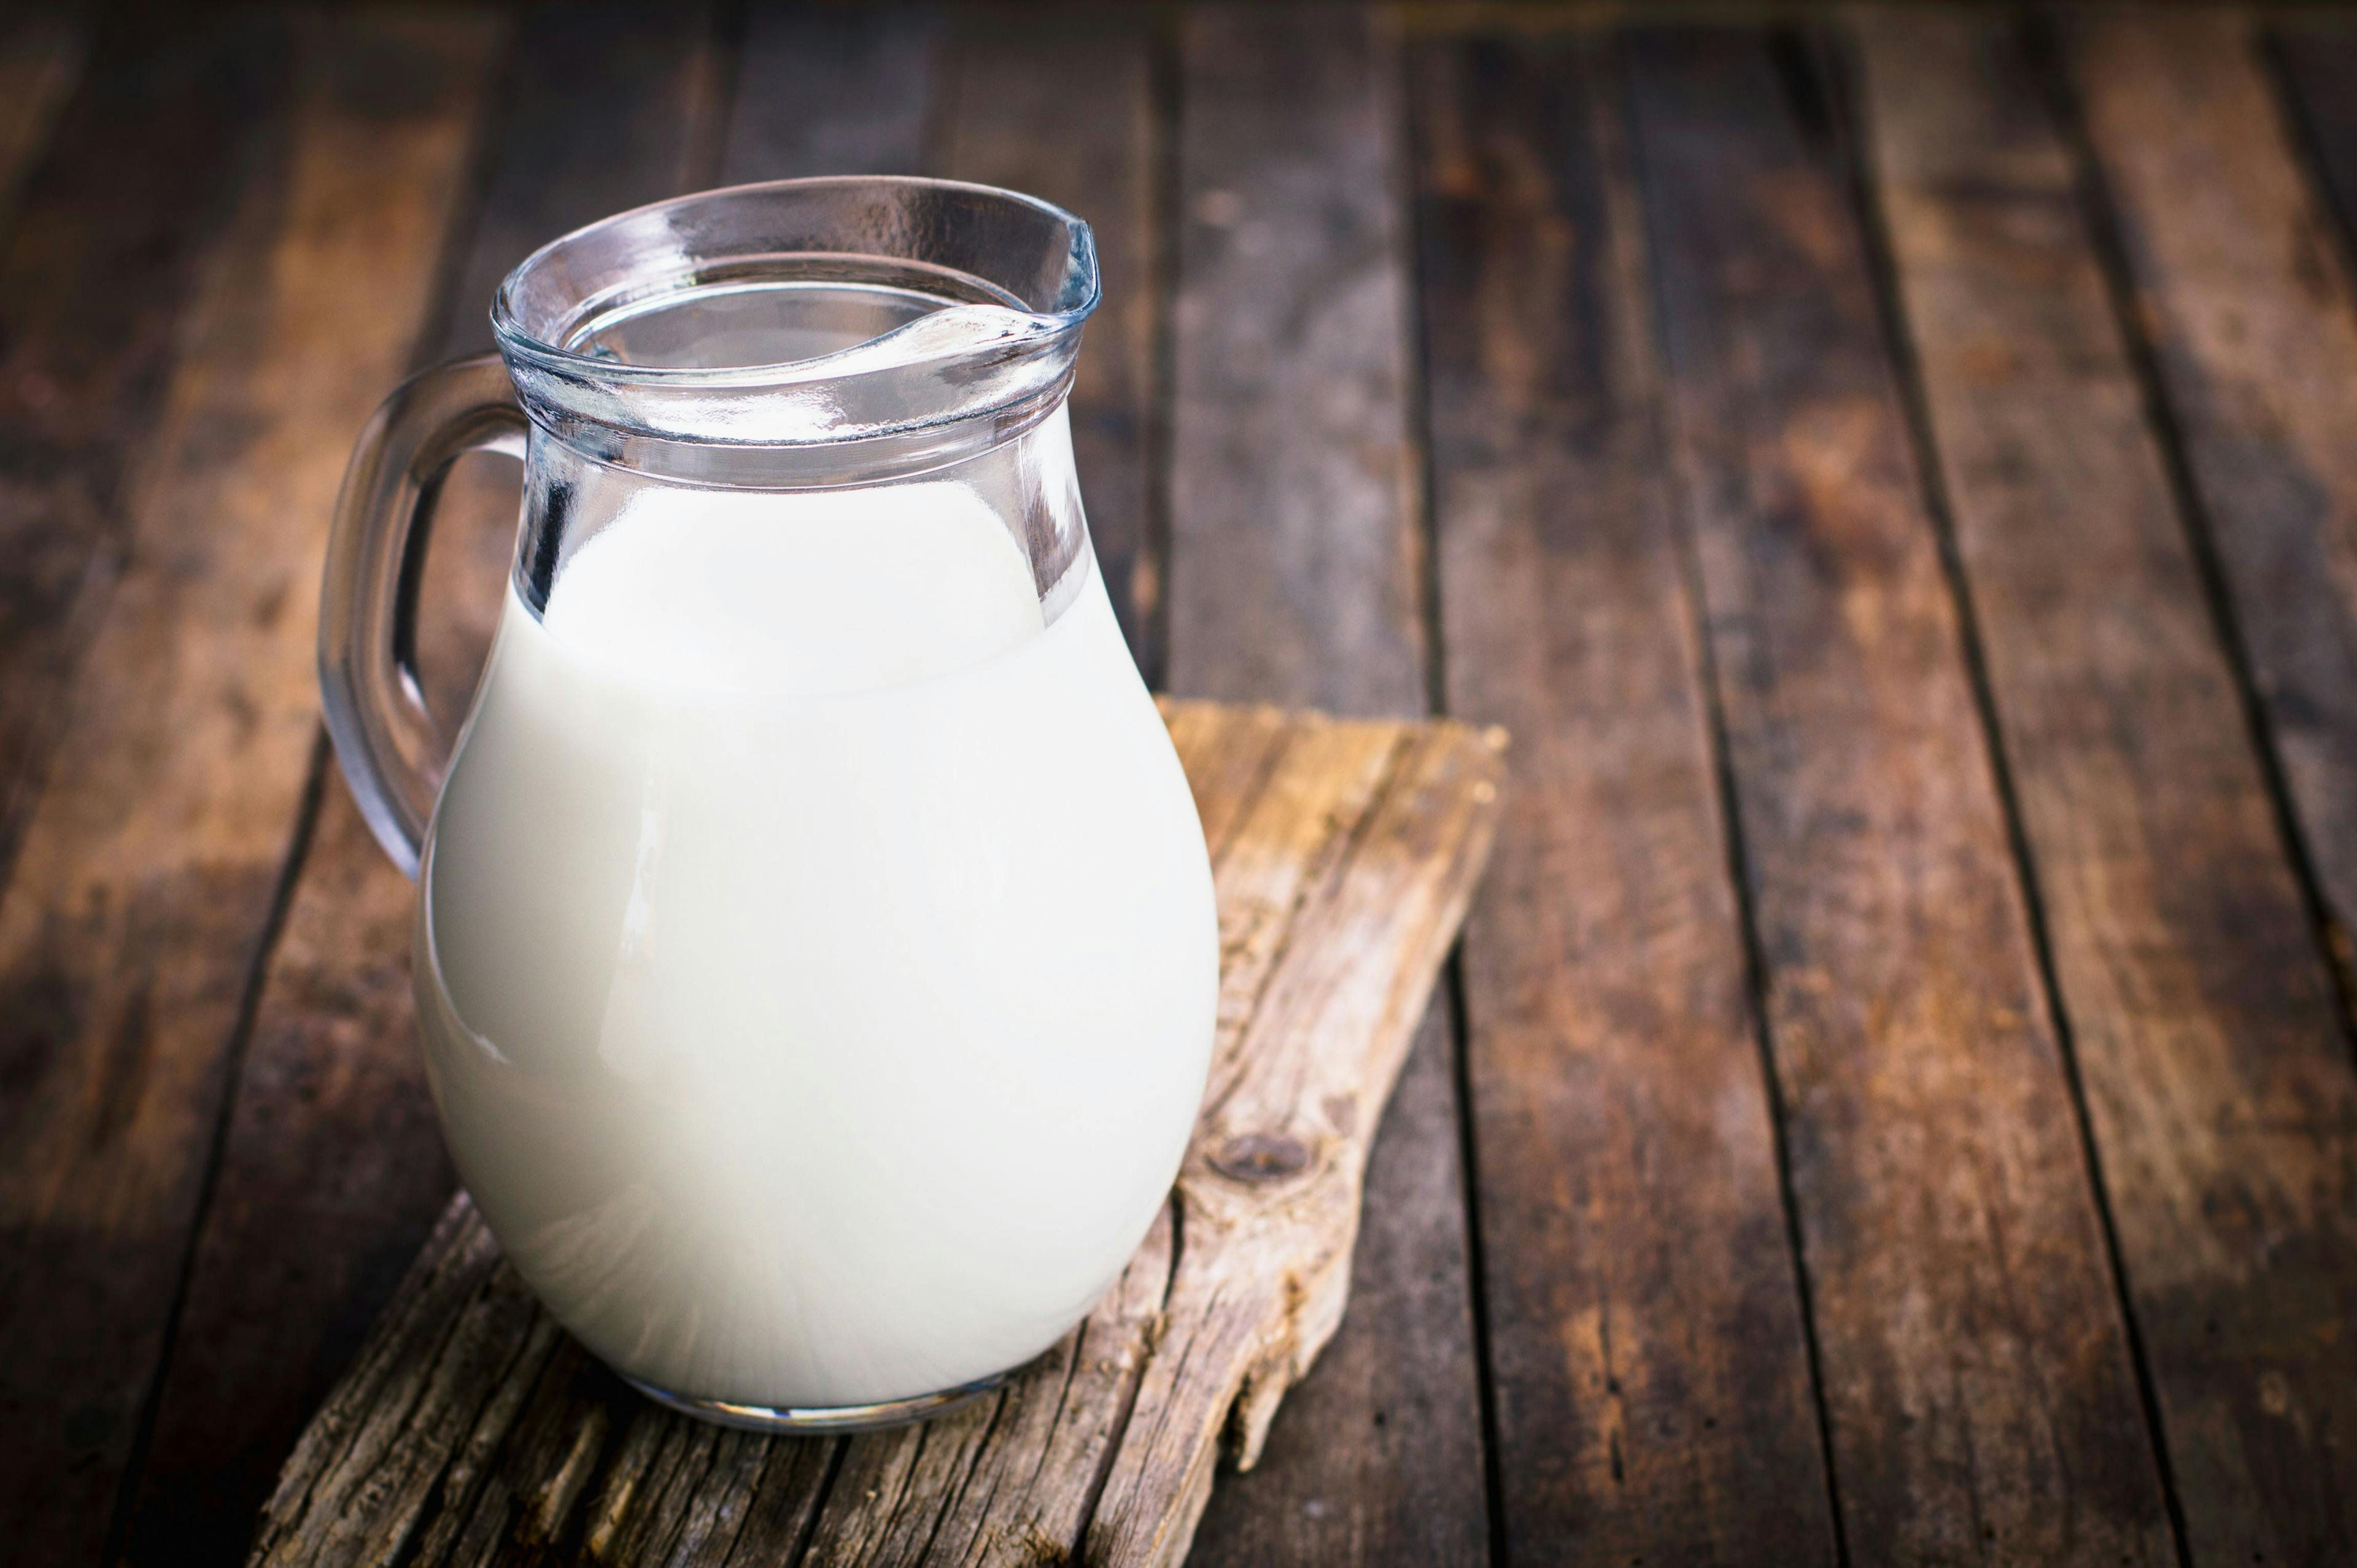 Fresh milk in the jug on the table | Image Credit: © pilipphoto - stock.adobe.com